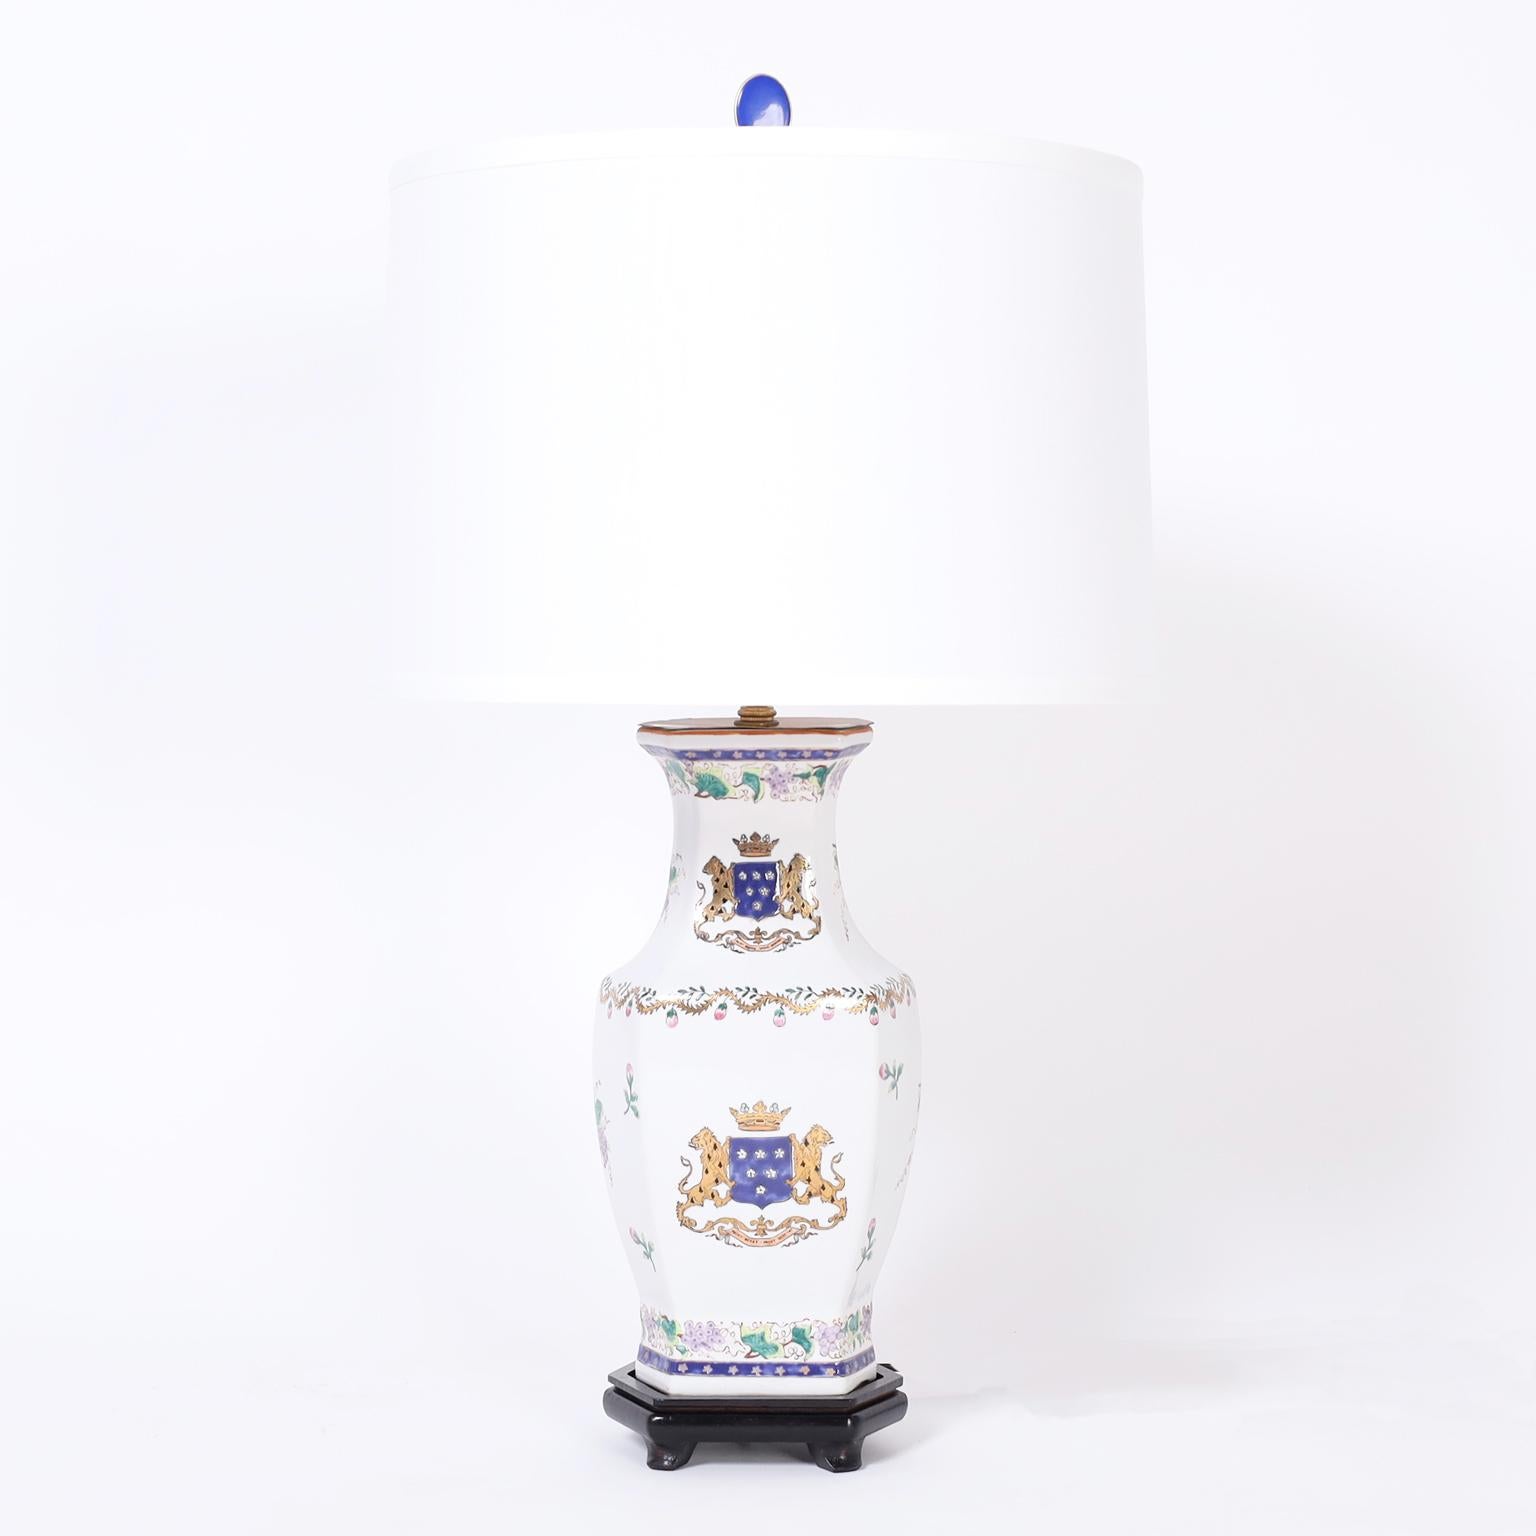 Pair of French porcelain table lamps with antique vases now lamps having classic form and armorial motifs with lions holding shields under a crown. Presented on Asian style wood bases.